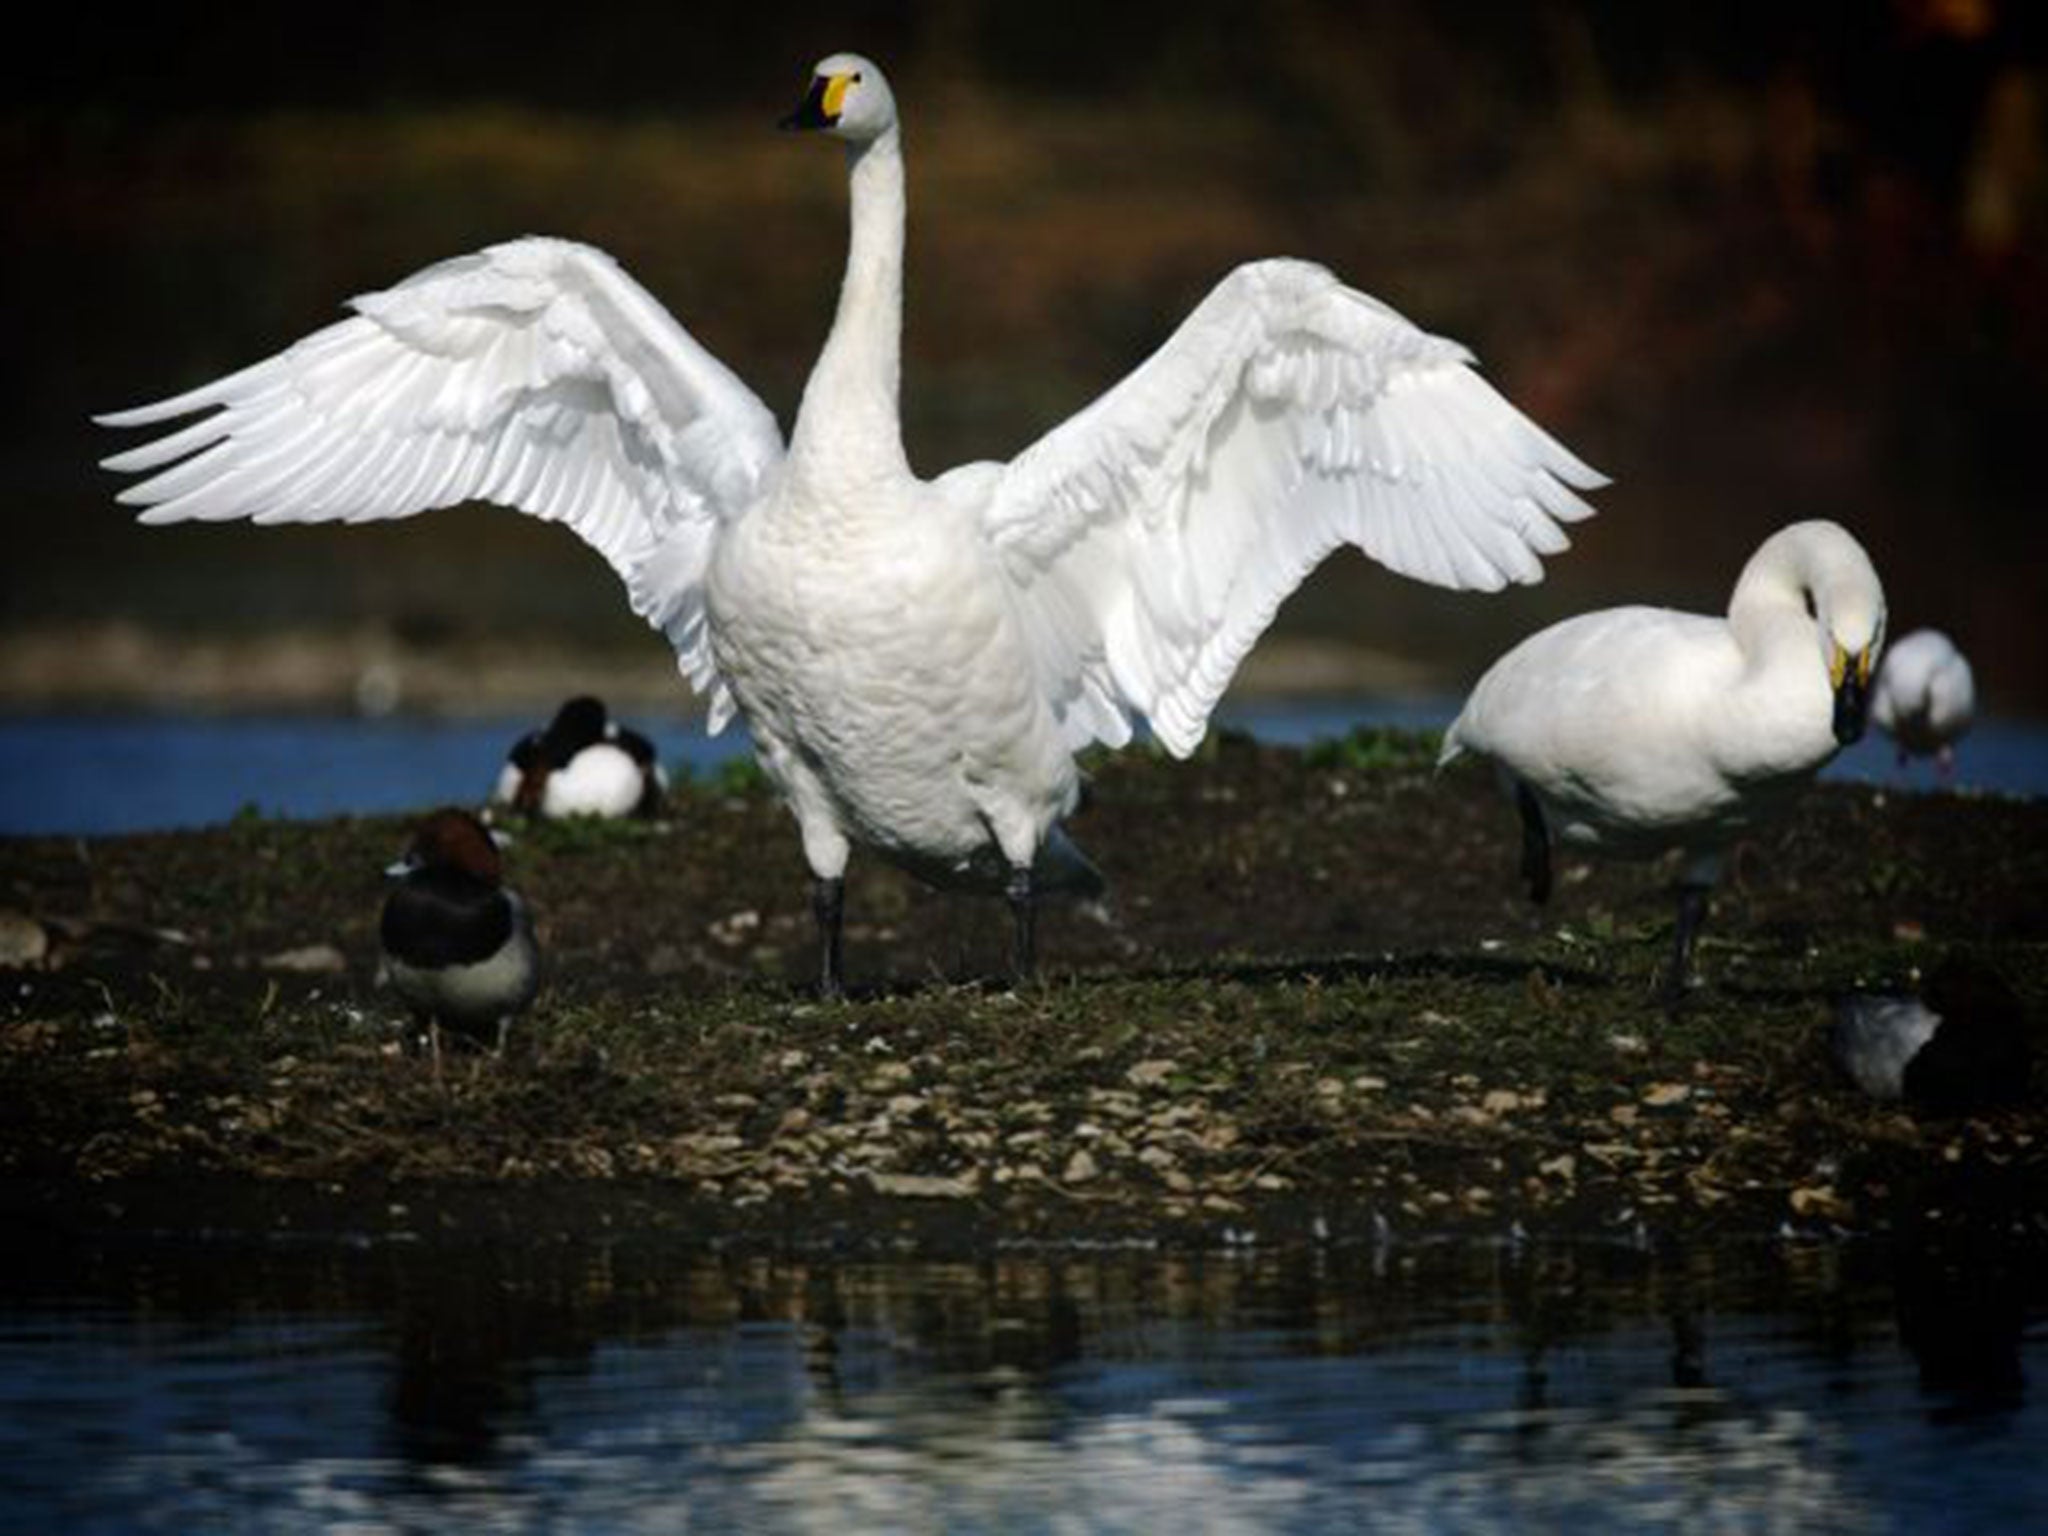 Bewick’s swans are named after a 19th century illustrator